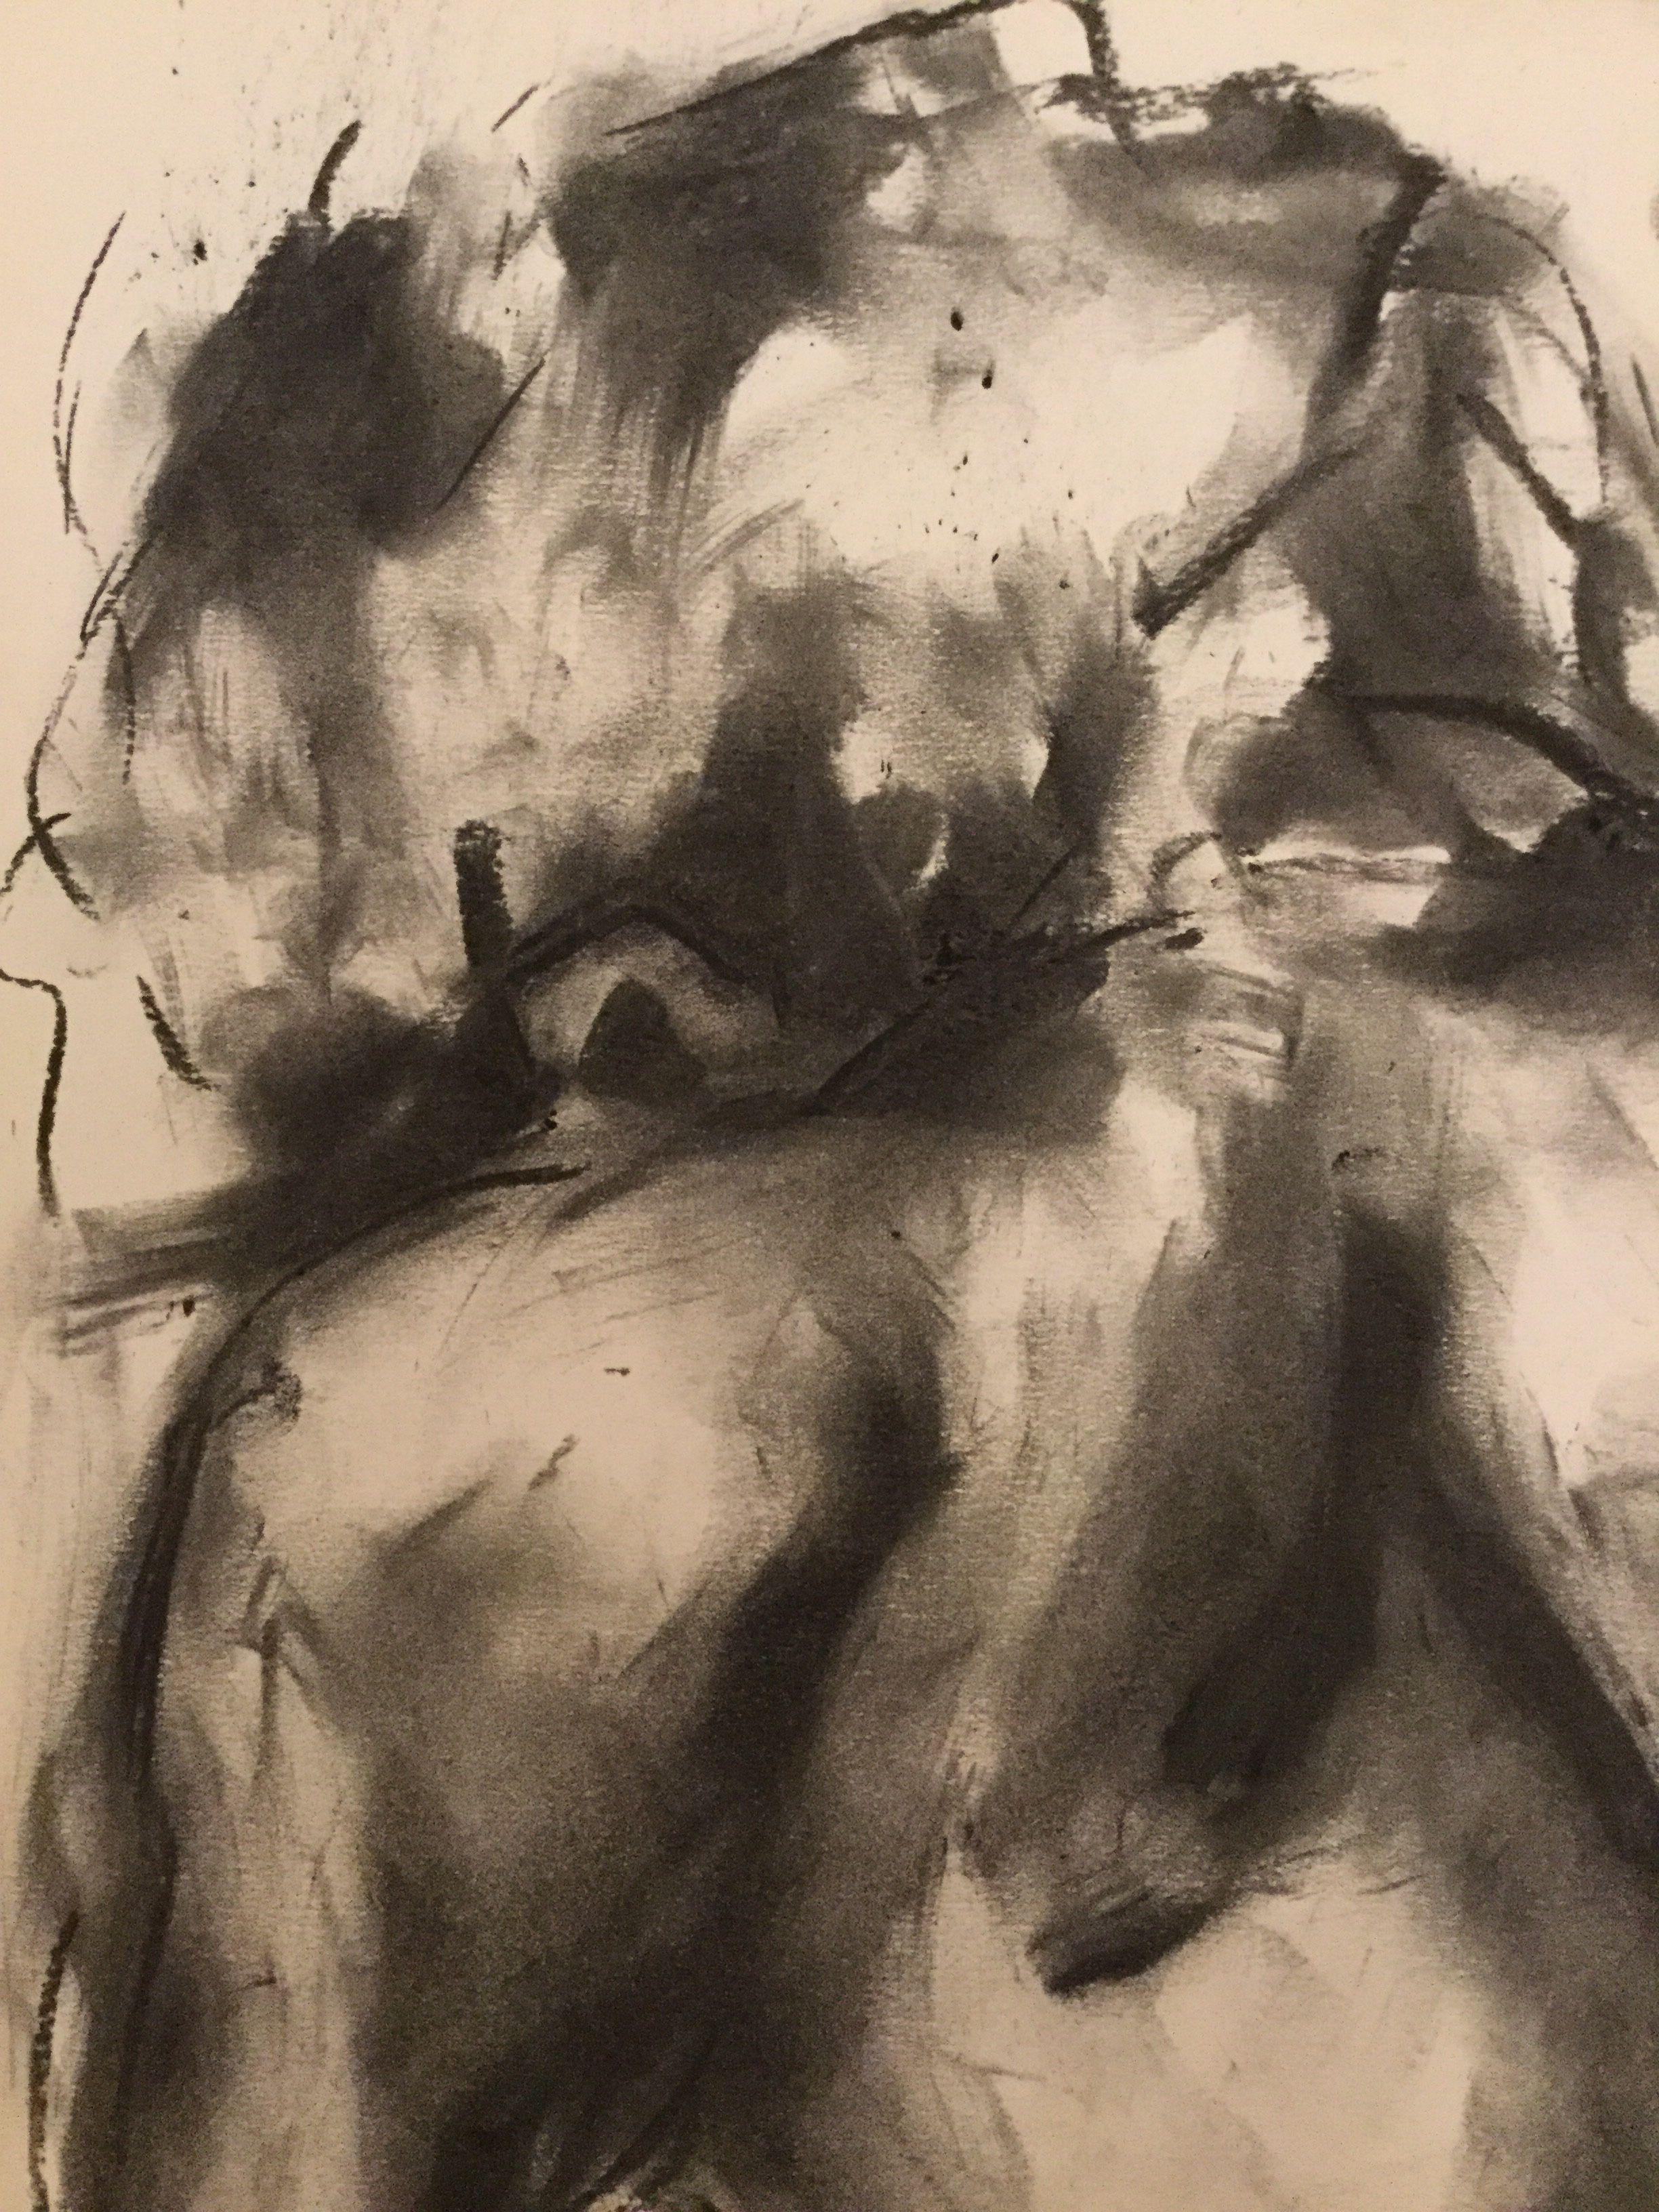 Finally, Drawing, Charcoal on Paper - Impressionist Art by James Shipton